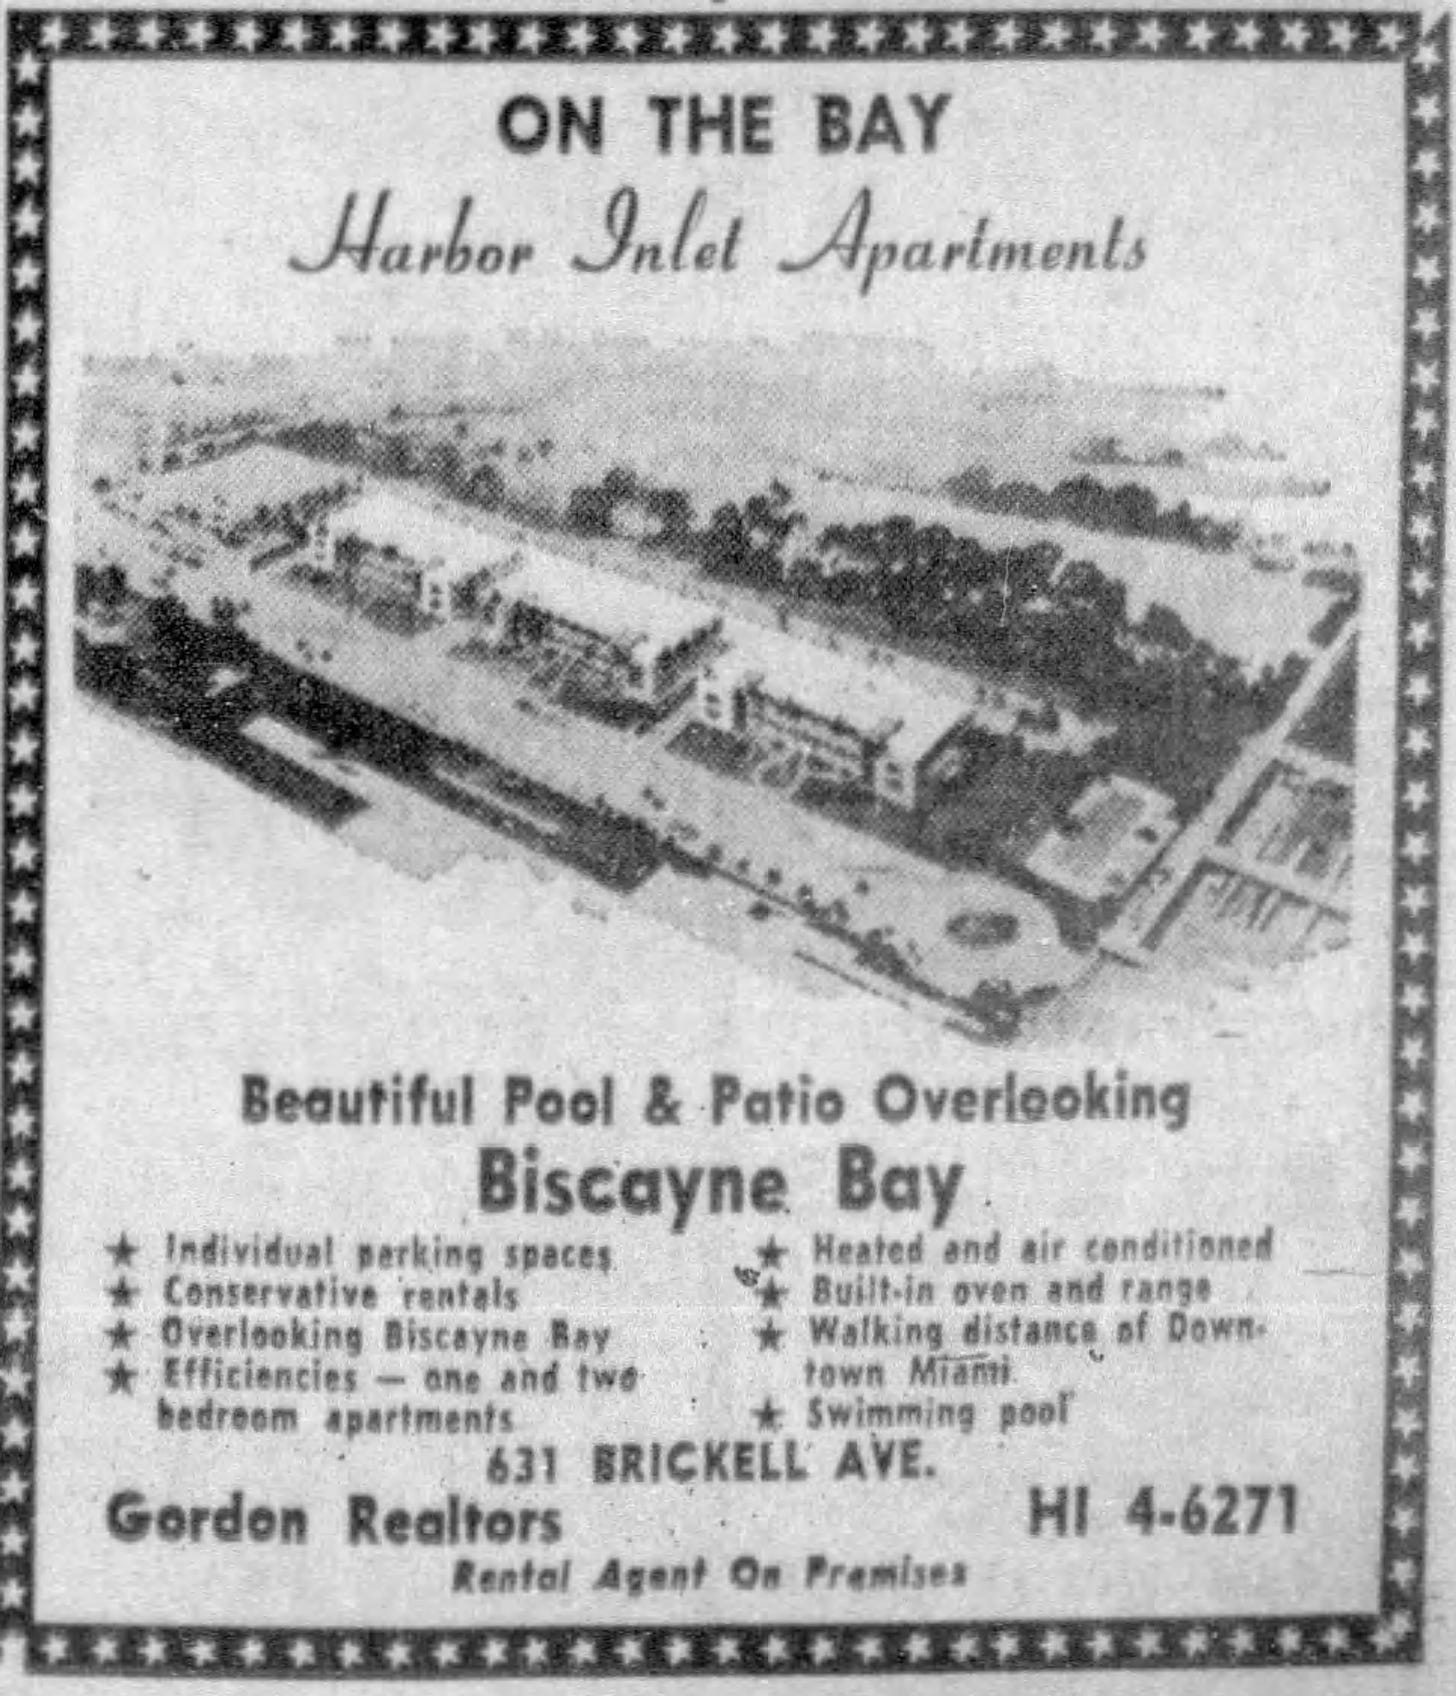 Figure 4: Ad for Harbor Inlet Apartments on September 14, 1958